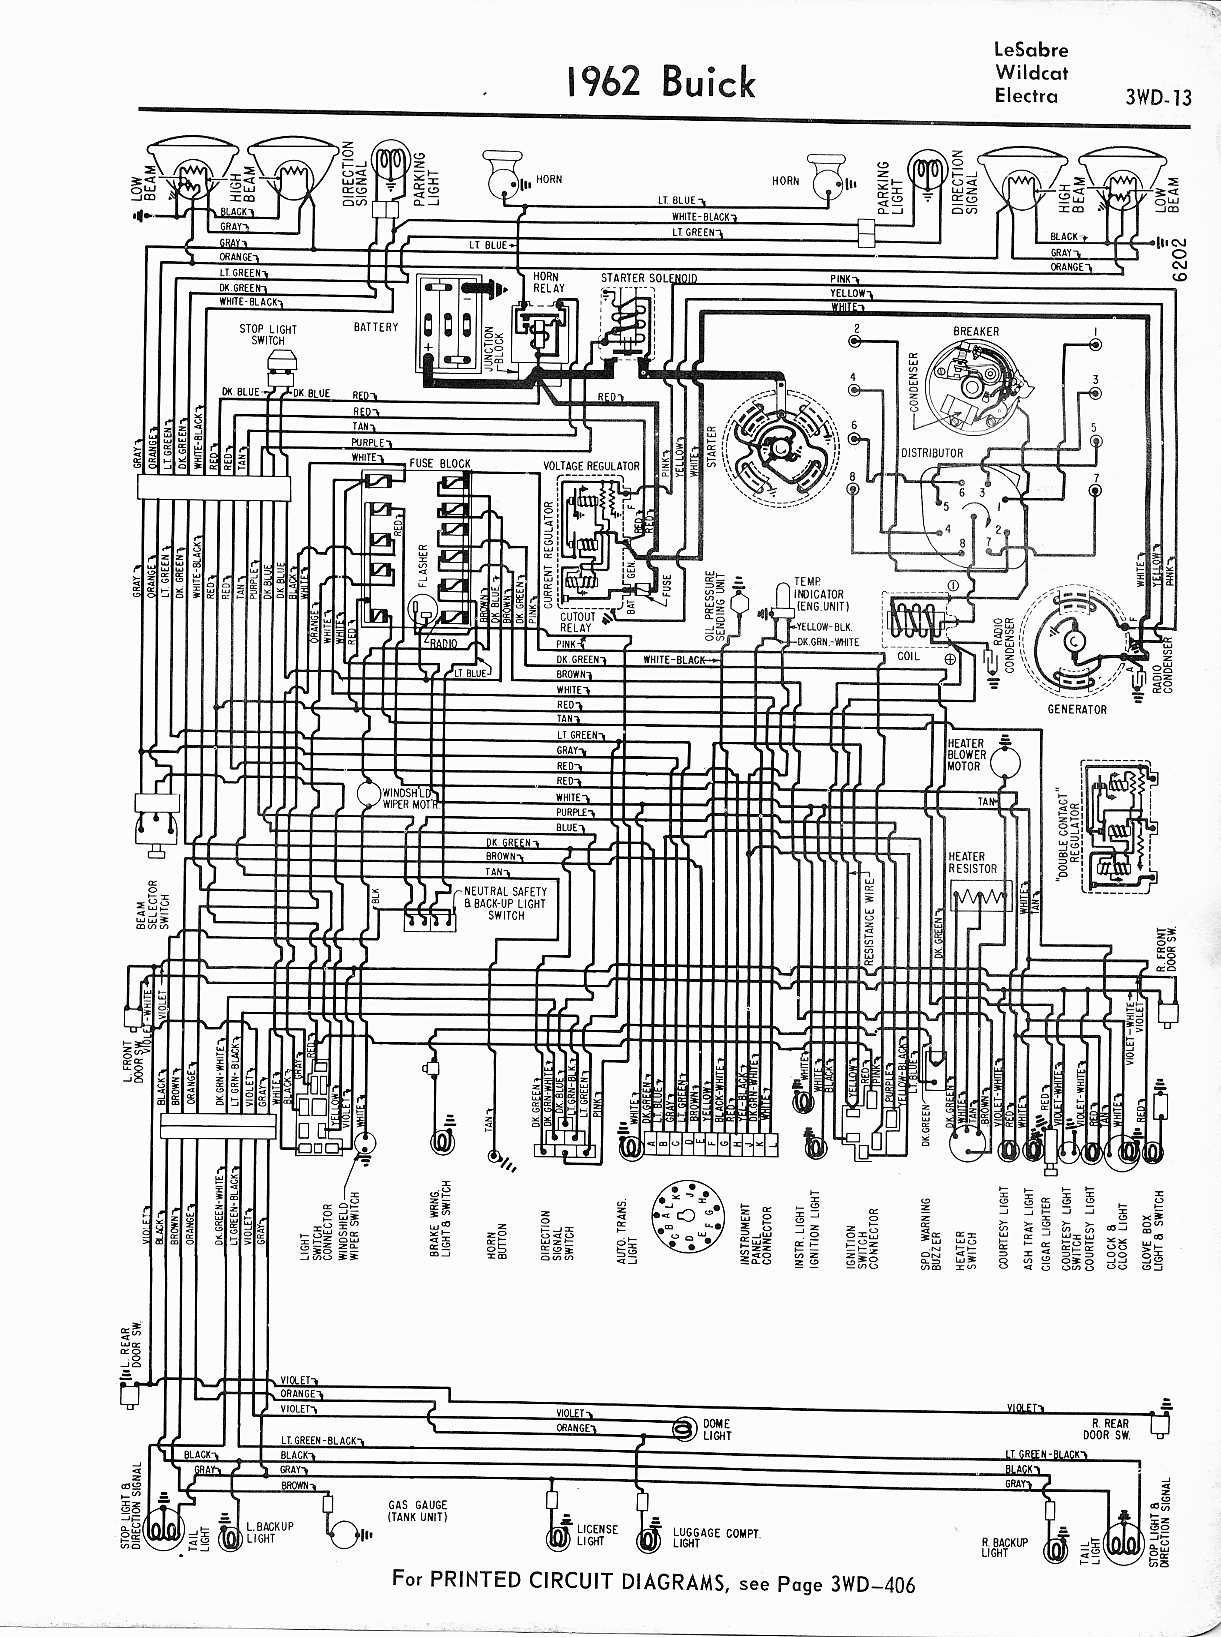 1985 Buick Regal Wiring Diagram from www.oldcarmanualproject.com